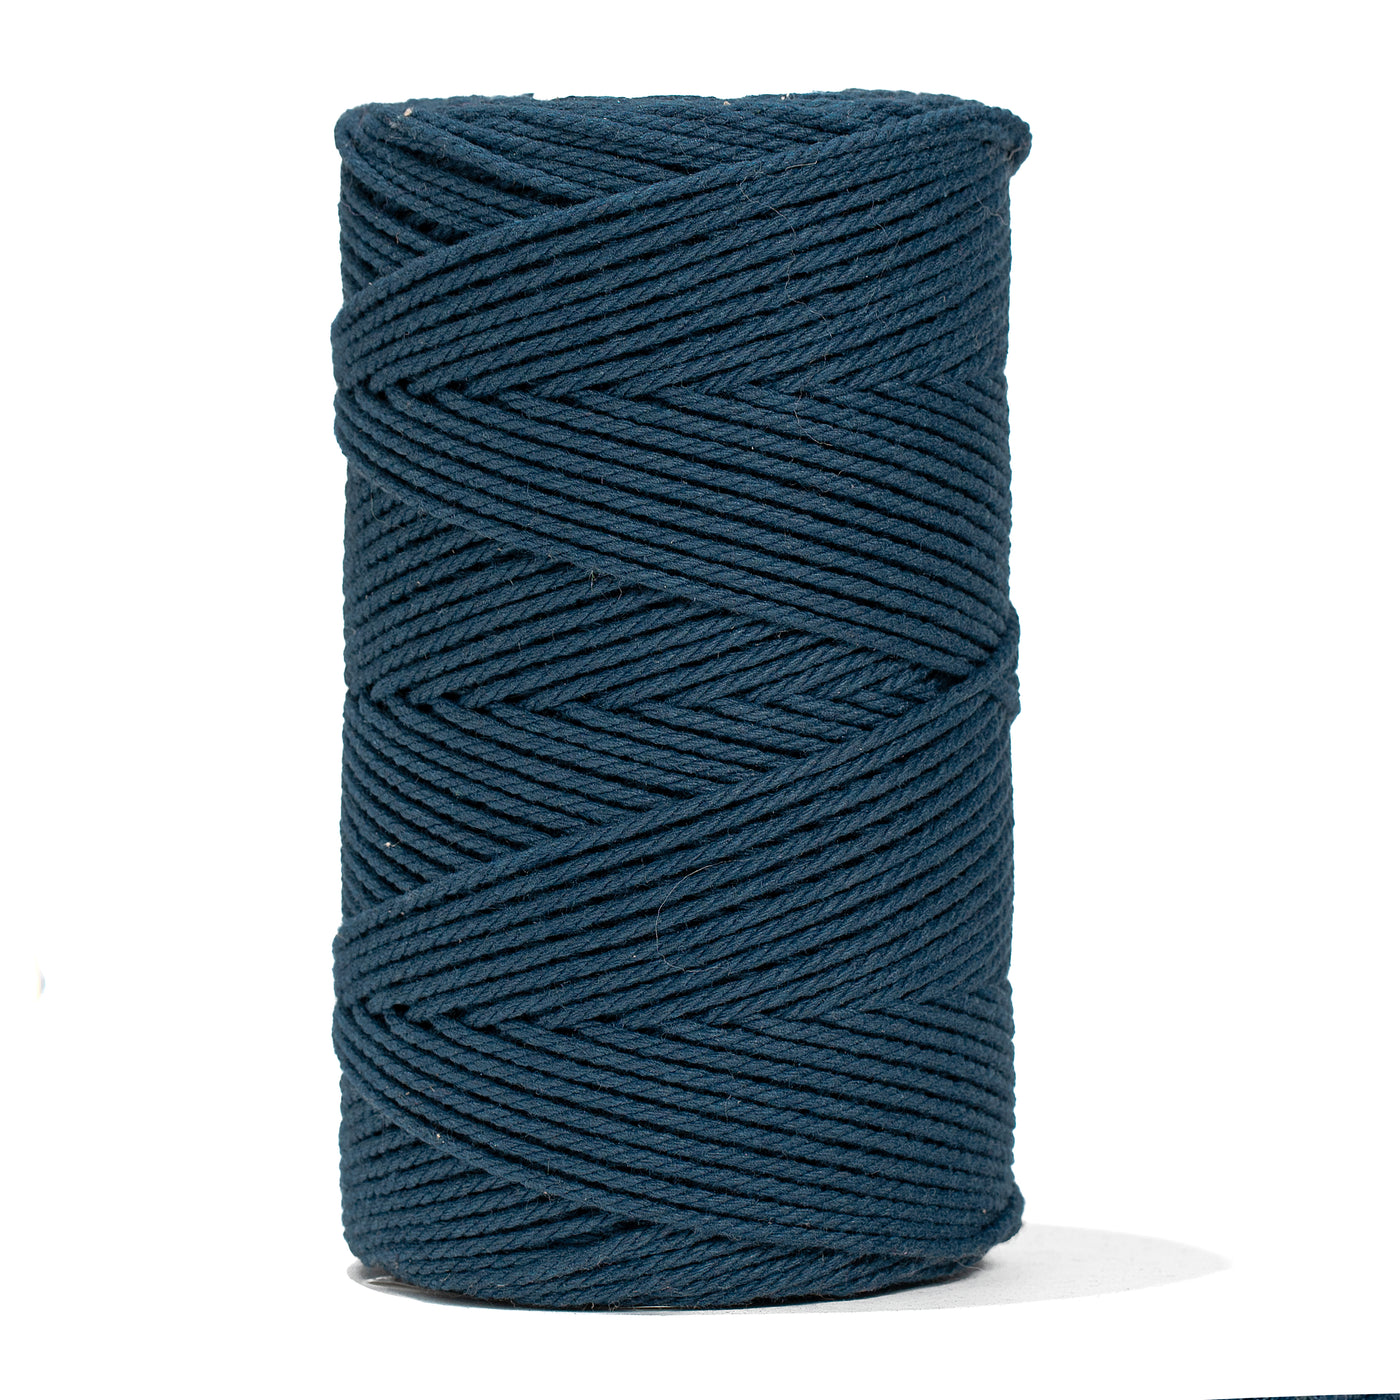 COTTON ROPE ZERO WASTE 2 MM - 3 PLY - PEACOCK BLUE COLOR